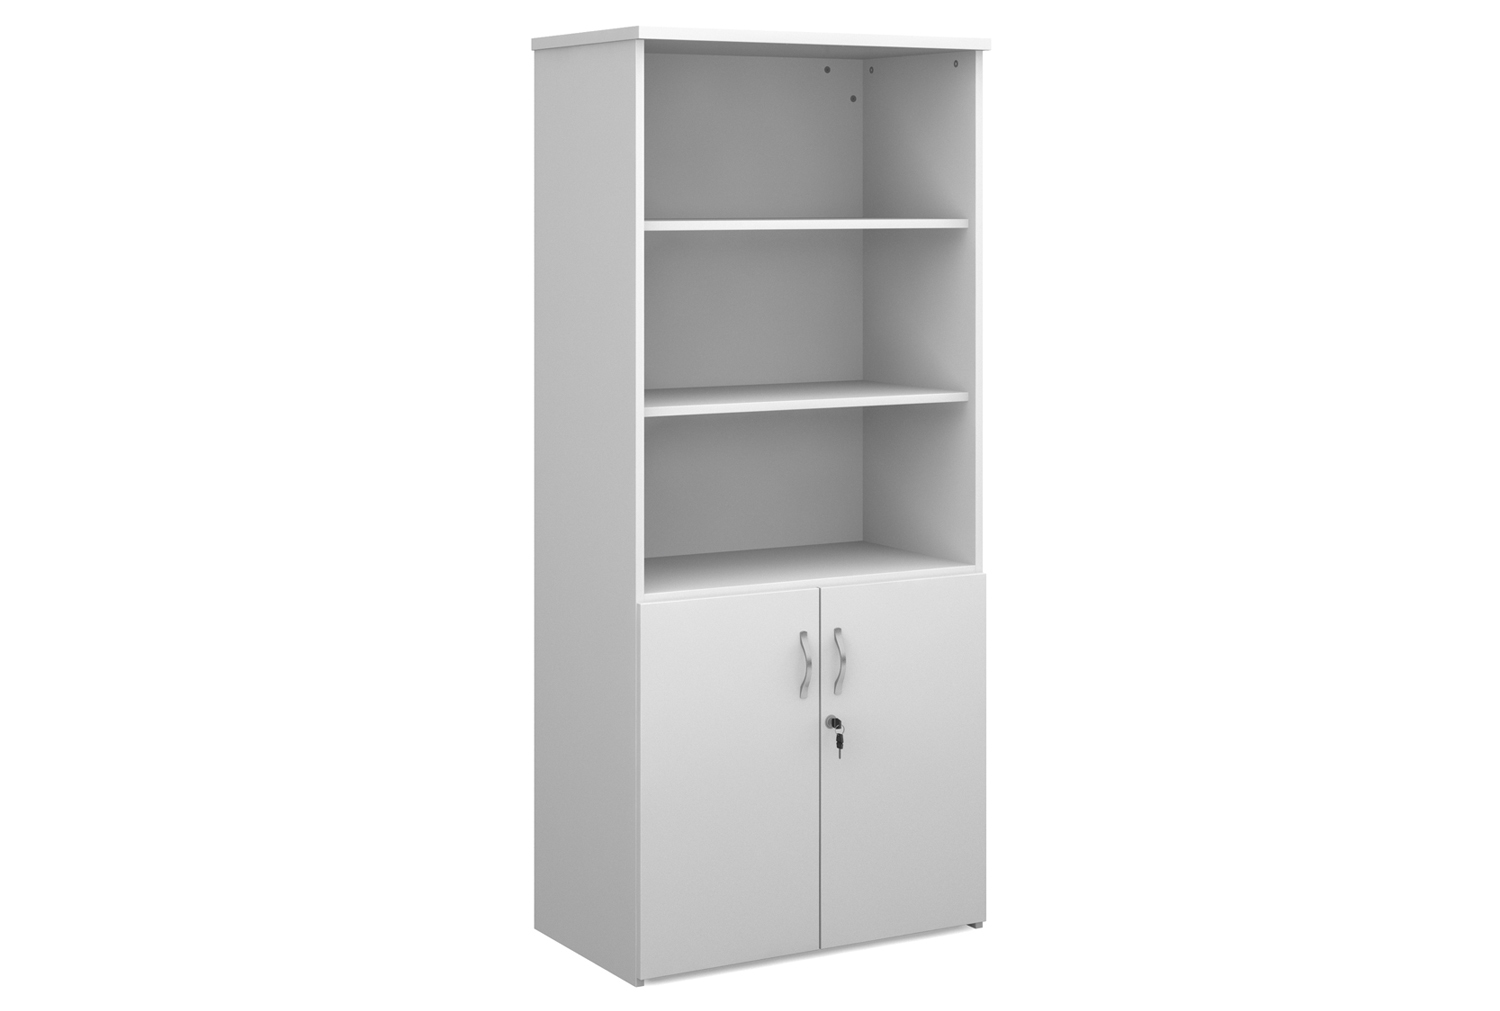 Duo Open Top Combination Office Cupboards, 4 Shelf - 80wx47dx179h (cm), White